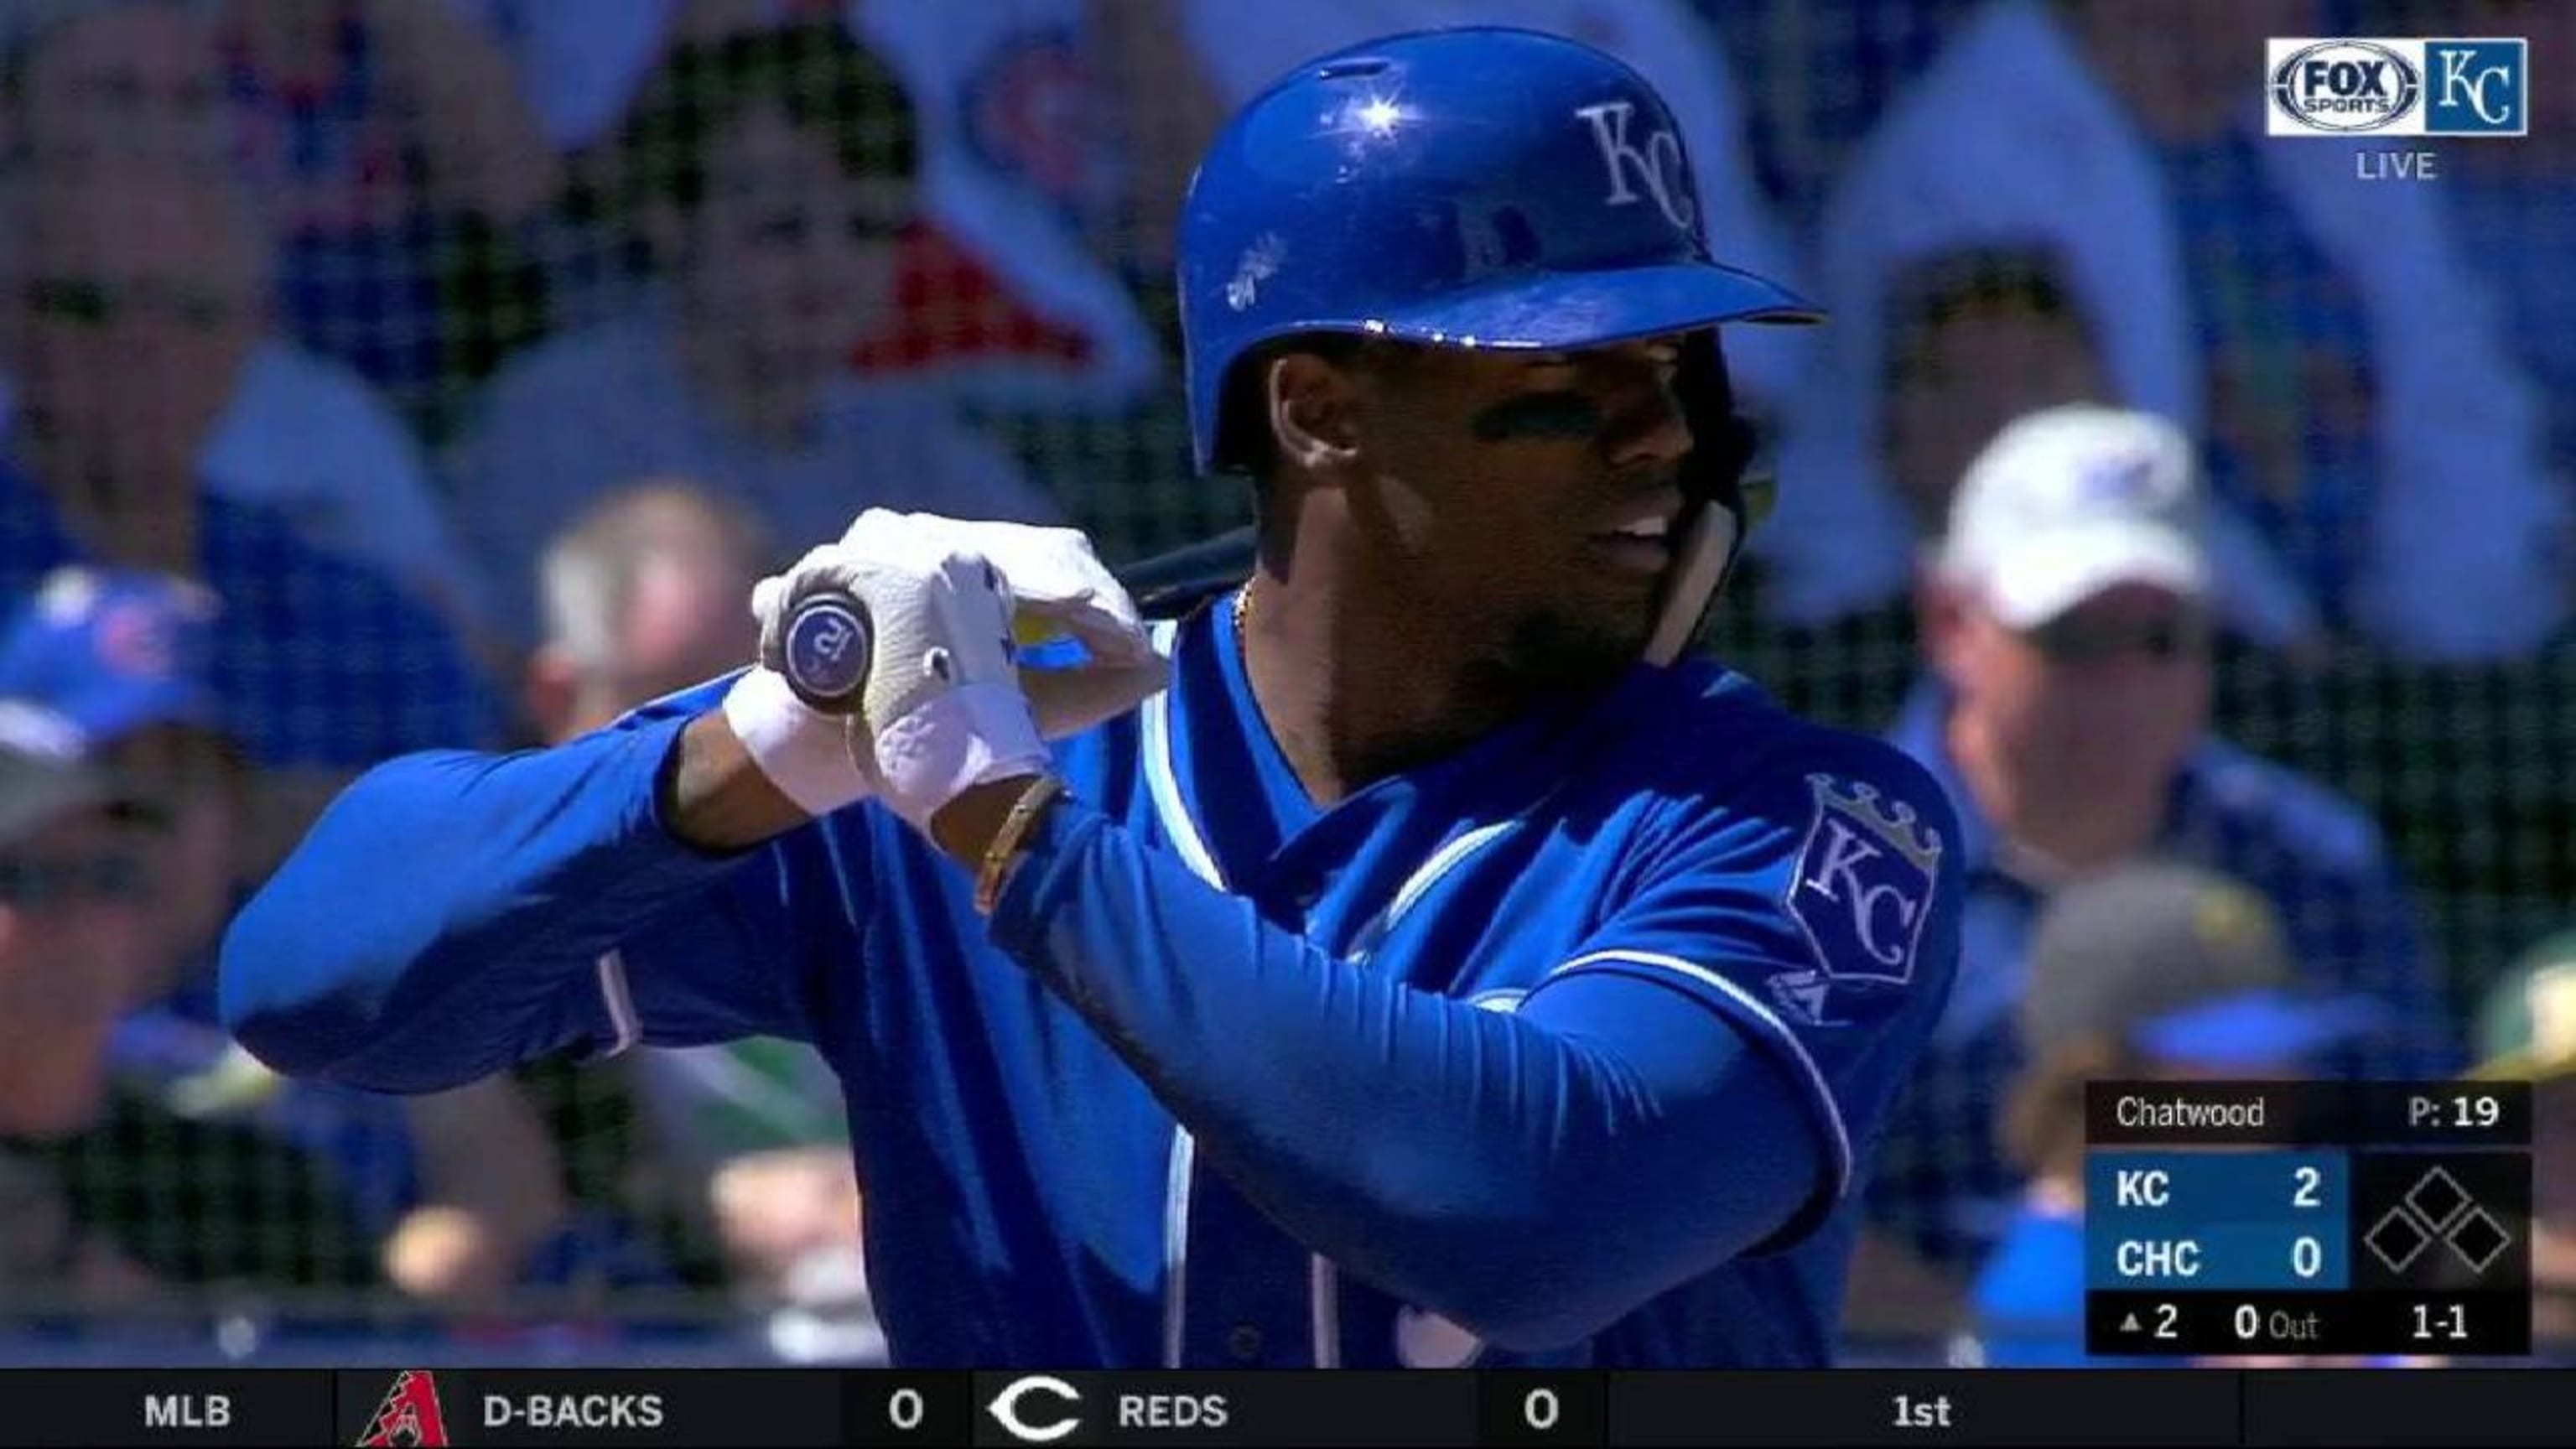 SOLER POWER!!! Jorge Soler has had a MONSTER May with TWELVE home